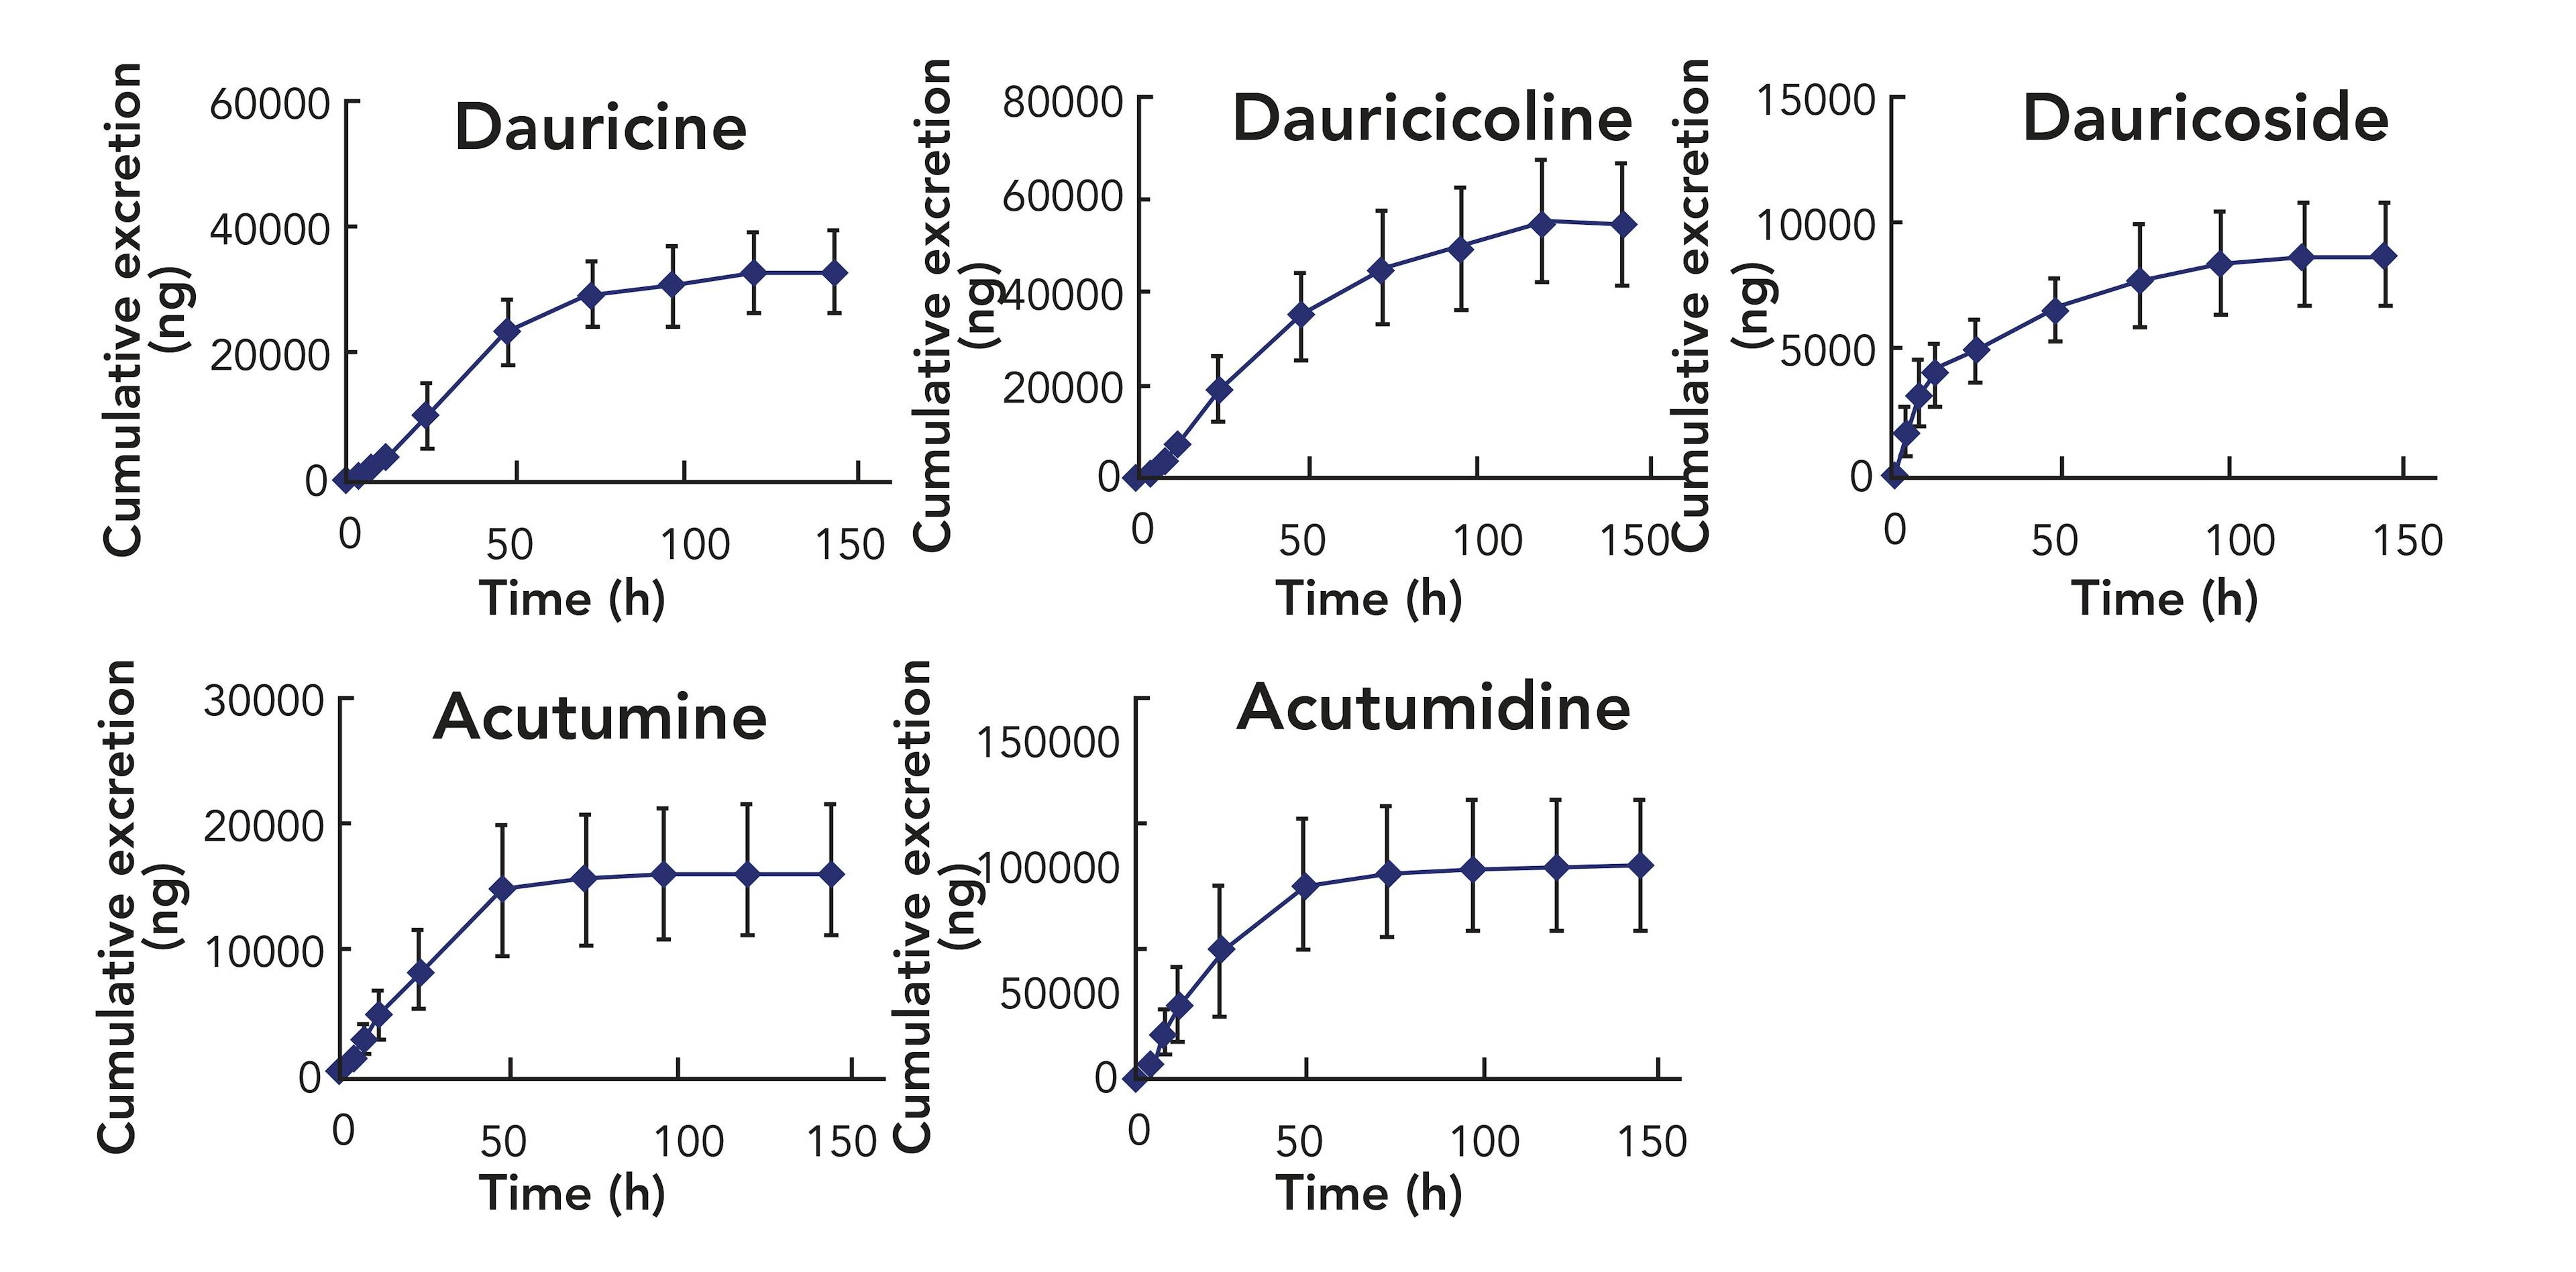 FIGURE 4: Mean cumulative urinary excretion-time profile of 5 analytes in rats after oral administration of menispermi rhizoma extract (n = 6). Axes labels for all figures are time (min) for the x-axis and cumulative excretion (ng) for the y-axis.